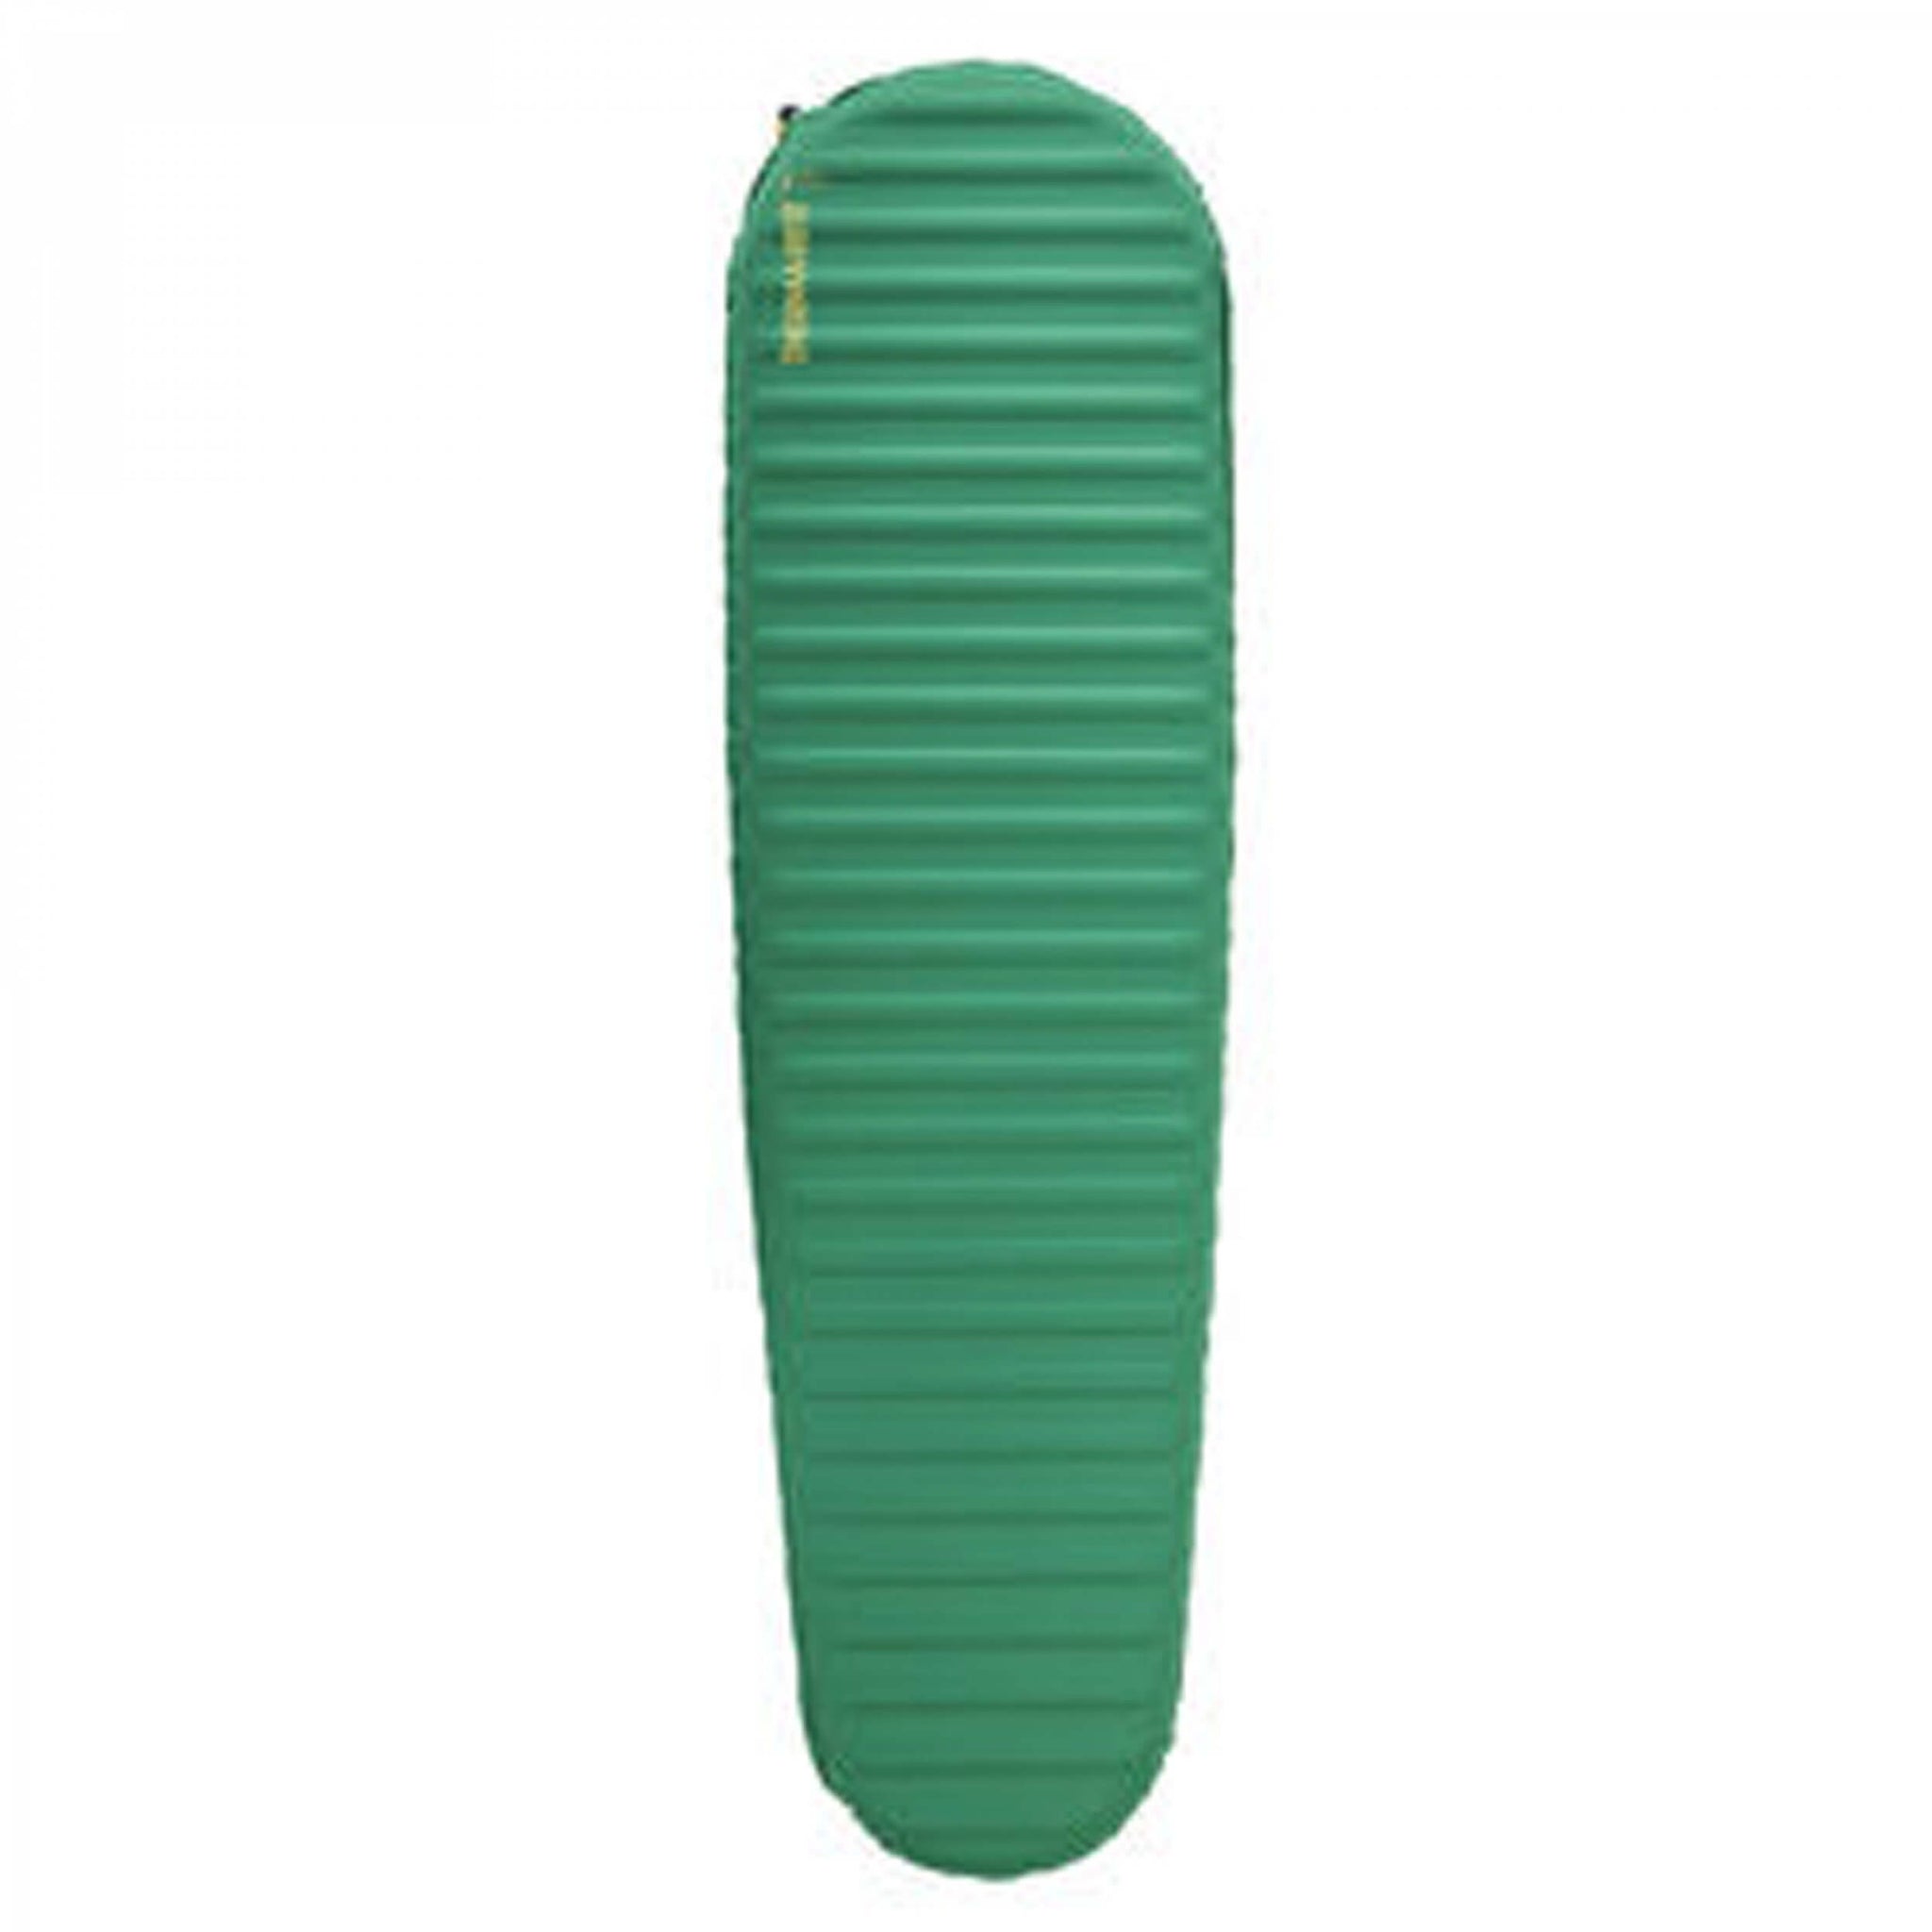 Therm-a-Rest Trail Pro Isomatte pine